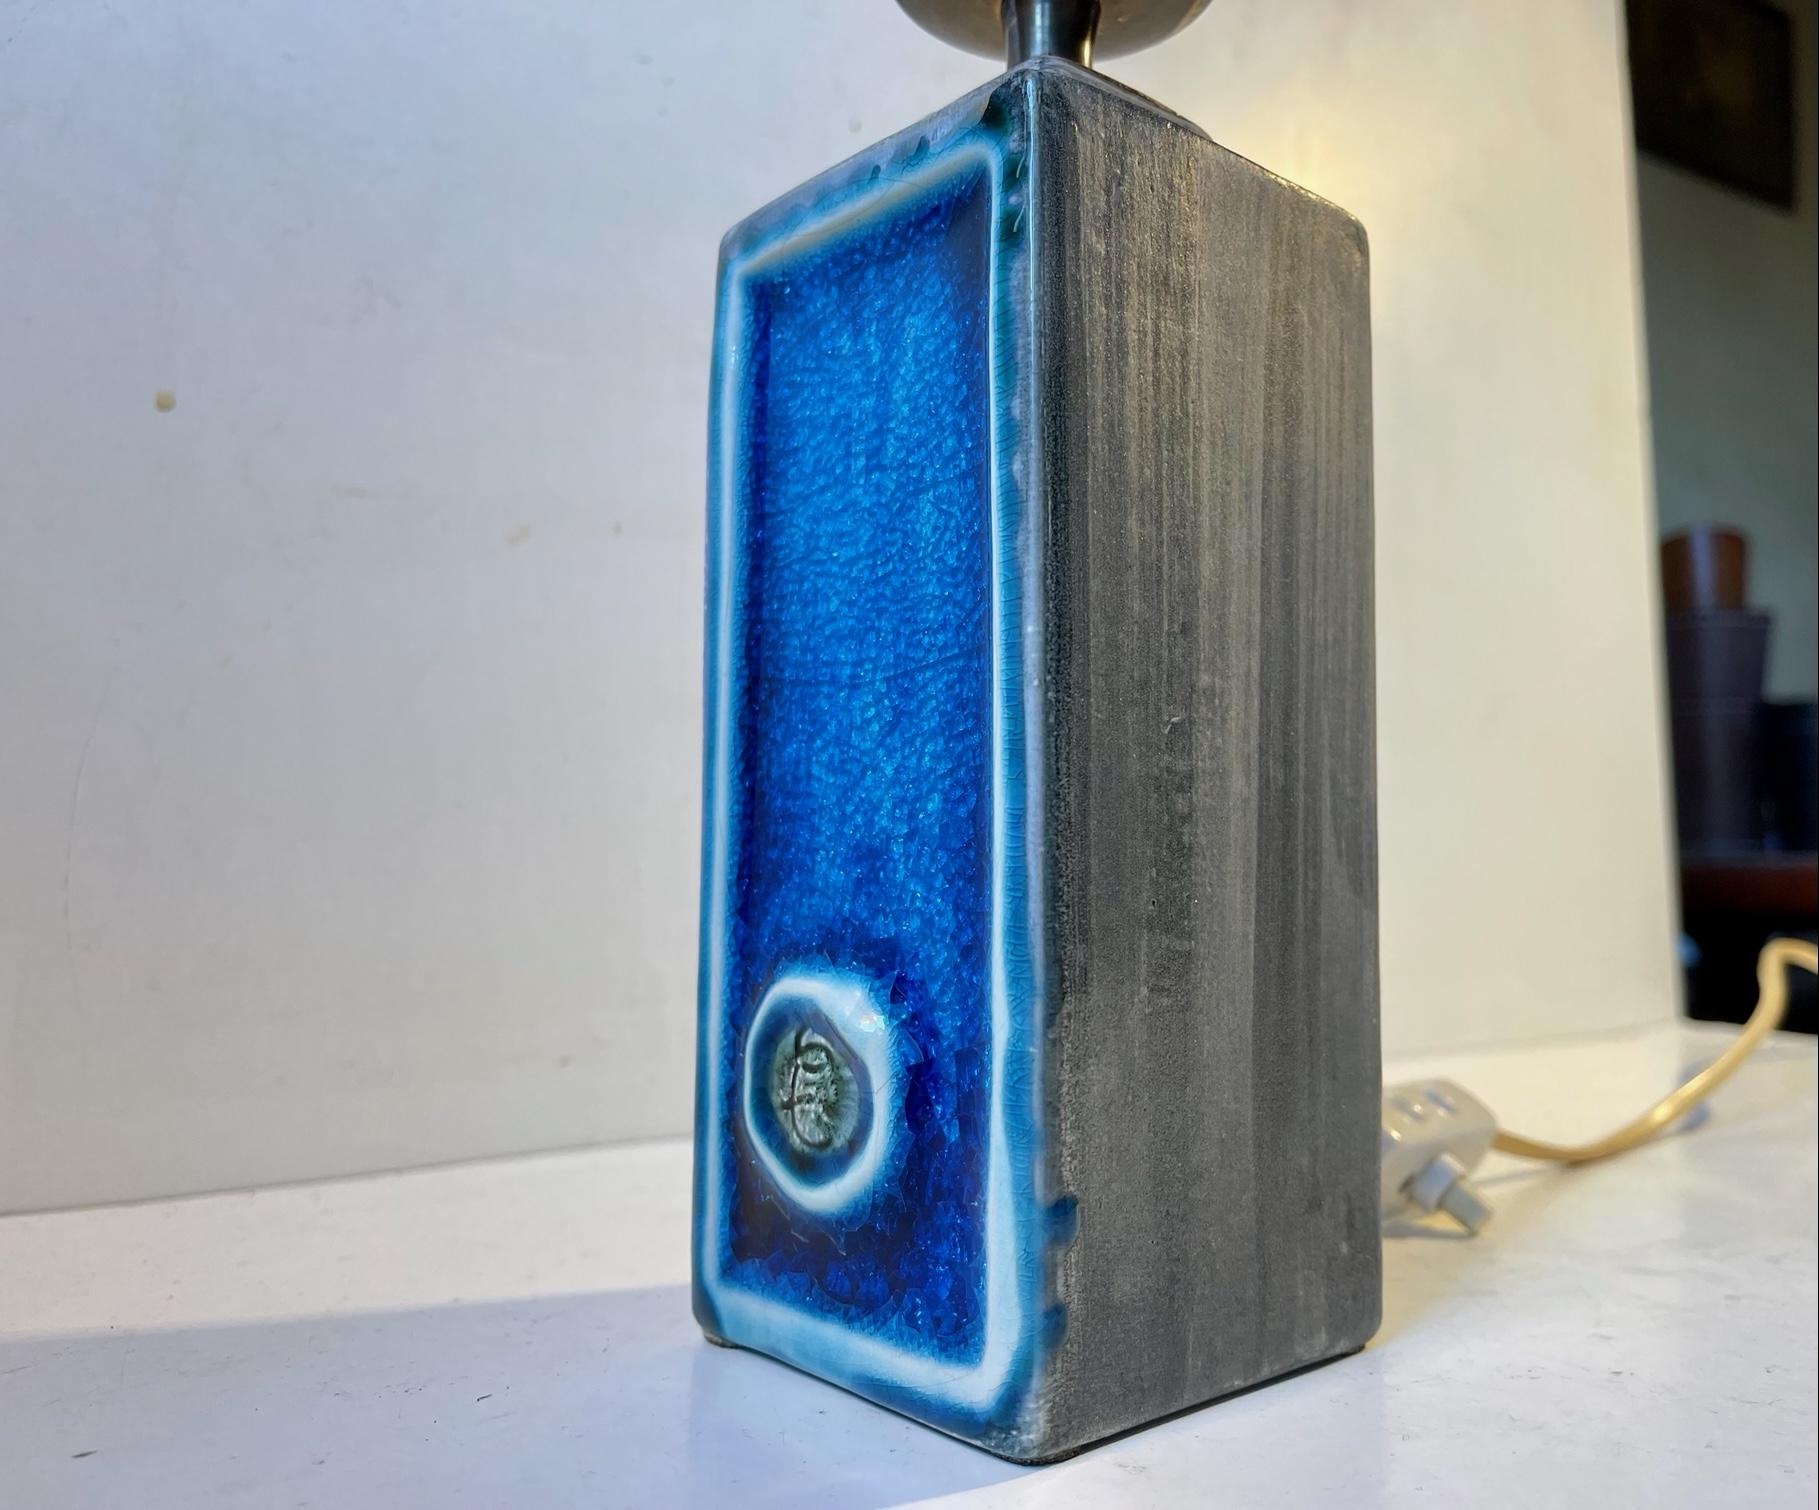 Rectangular ceramic table lamp with blue craquele/crackle glaze. Made in Italy, possibly by Bistossi, during the 1960s on commission from Elektrik in Norway. Please notice that is is sold without the model shade. Please personalize with your own.